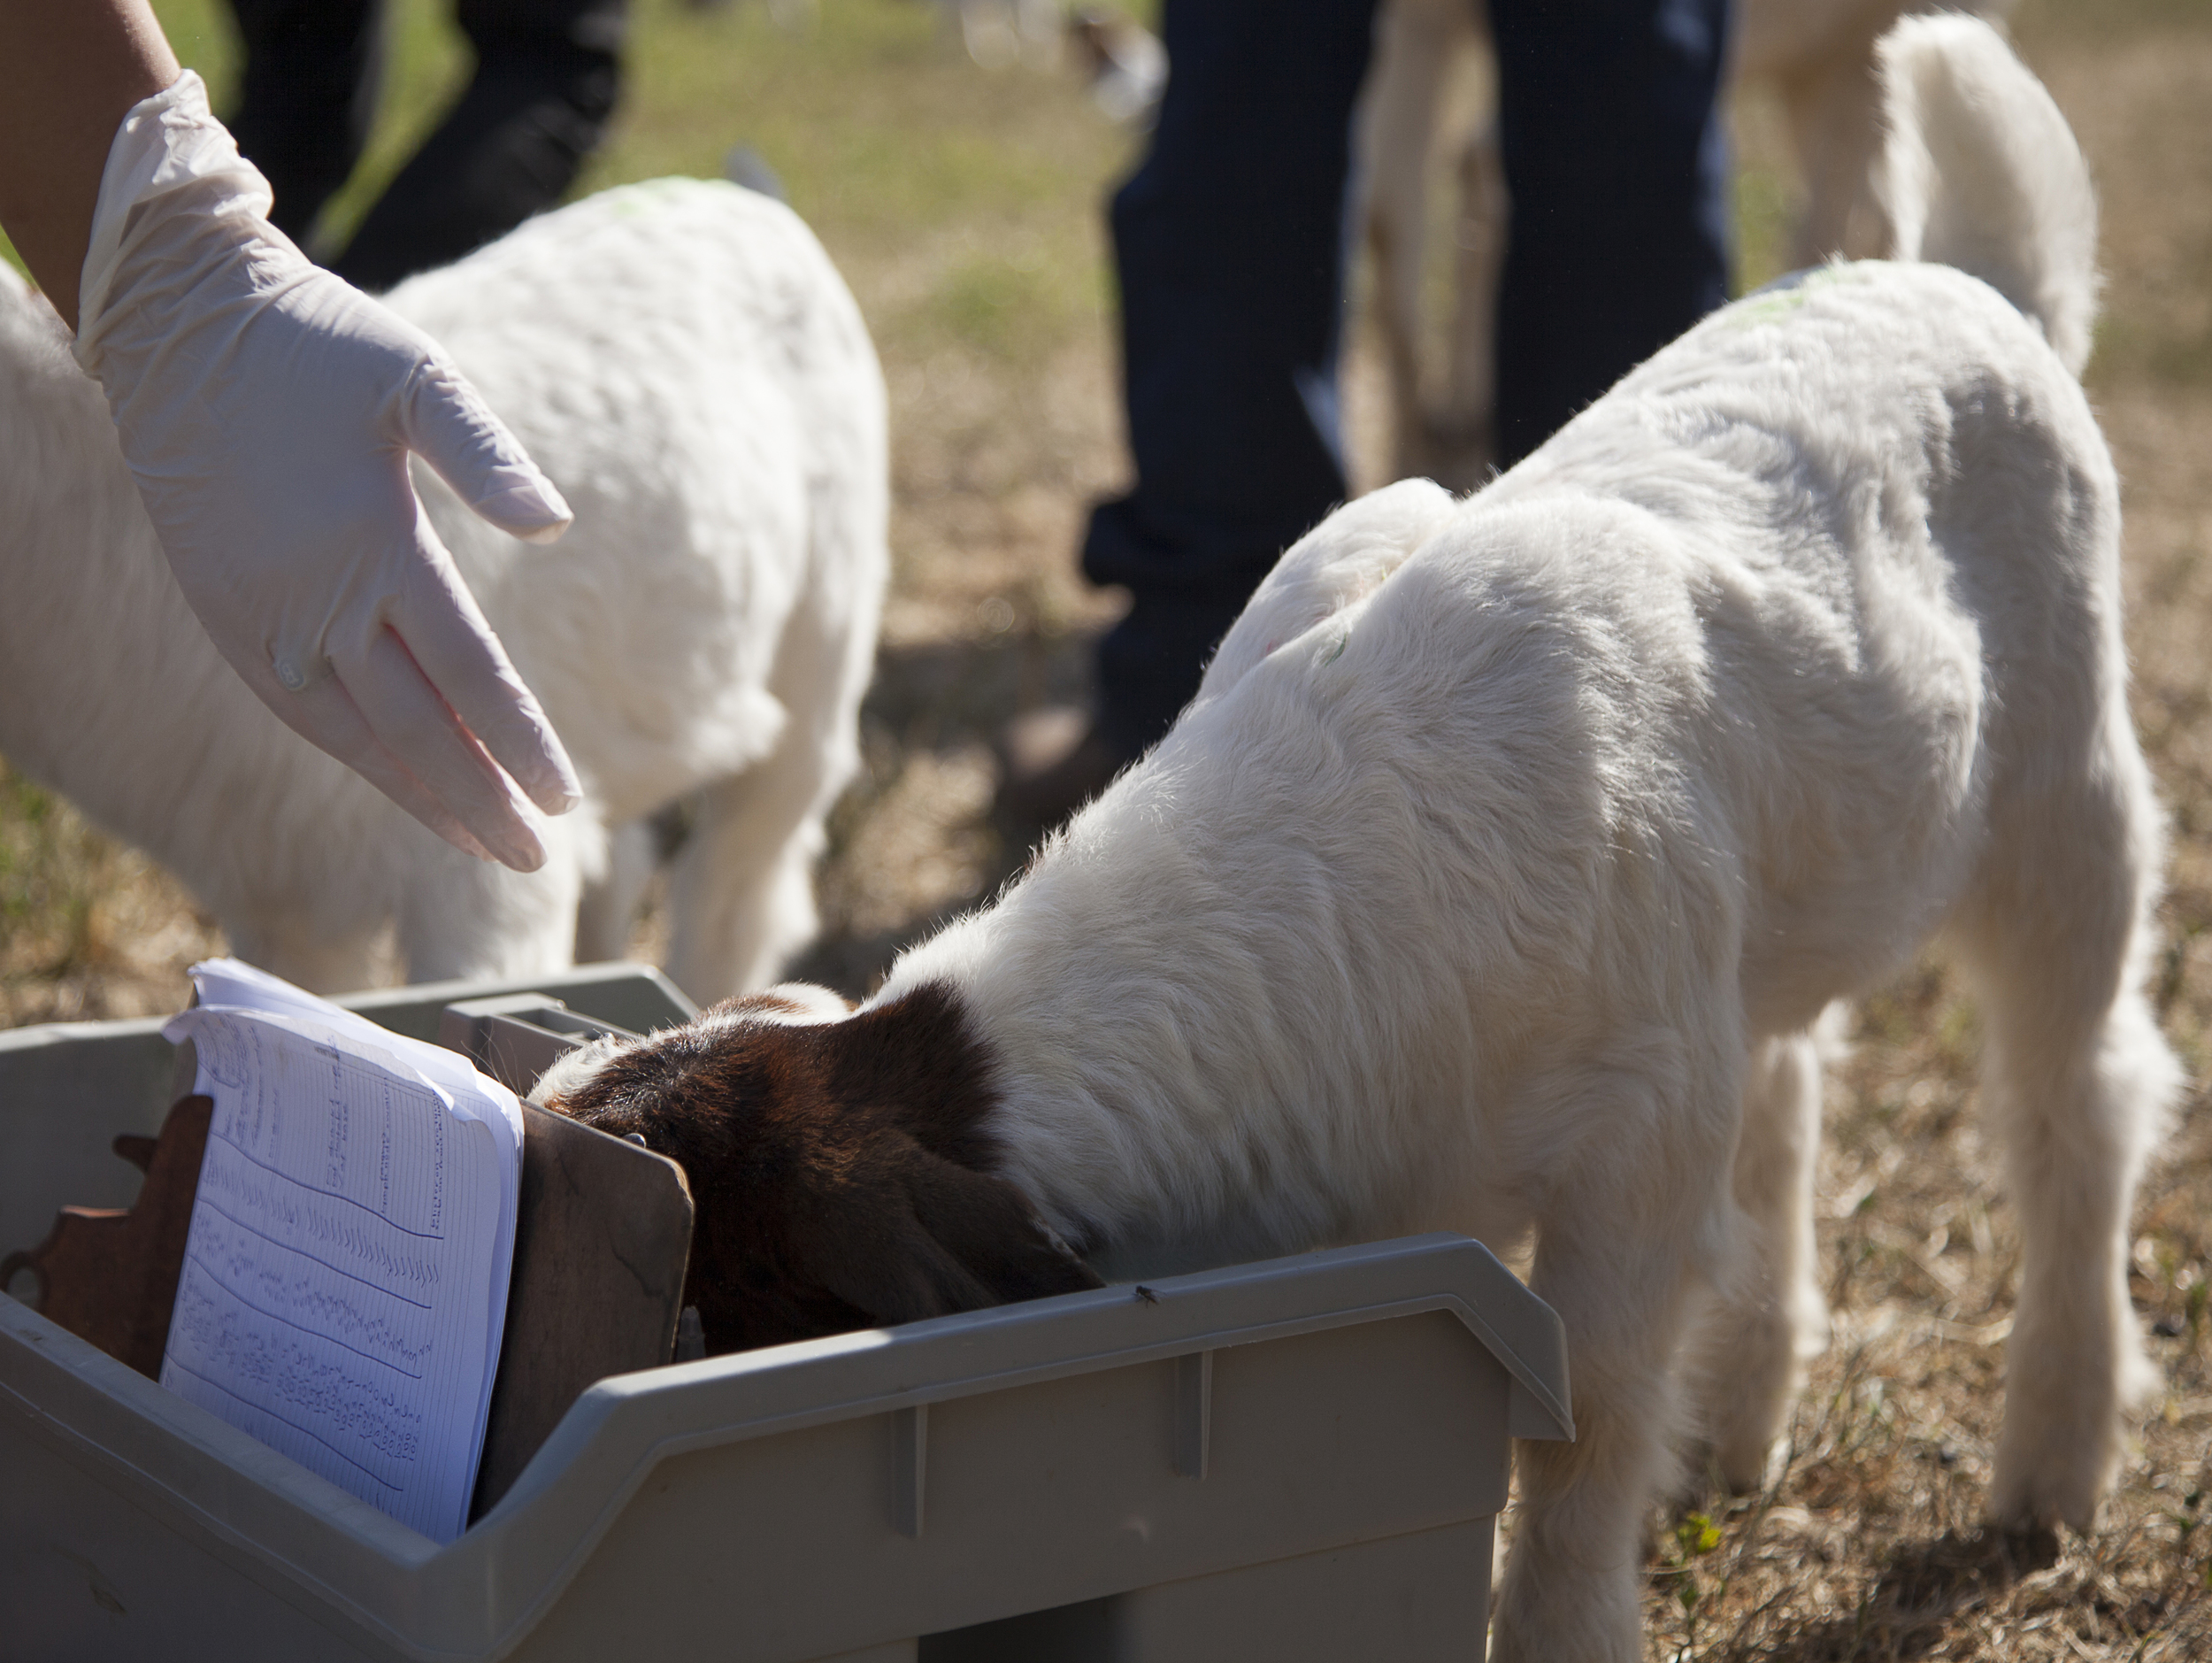  A baby goat goes through a medical tote during a routine physical exam at the Pierce farm on Friday, March 20, 2015. Woodland Hills, Calif.  Read the full story&nbsp; here  